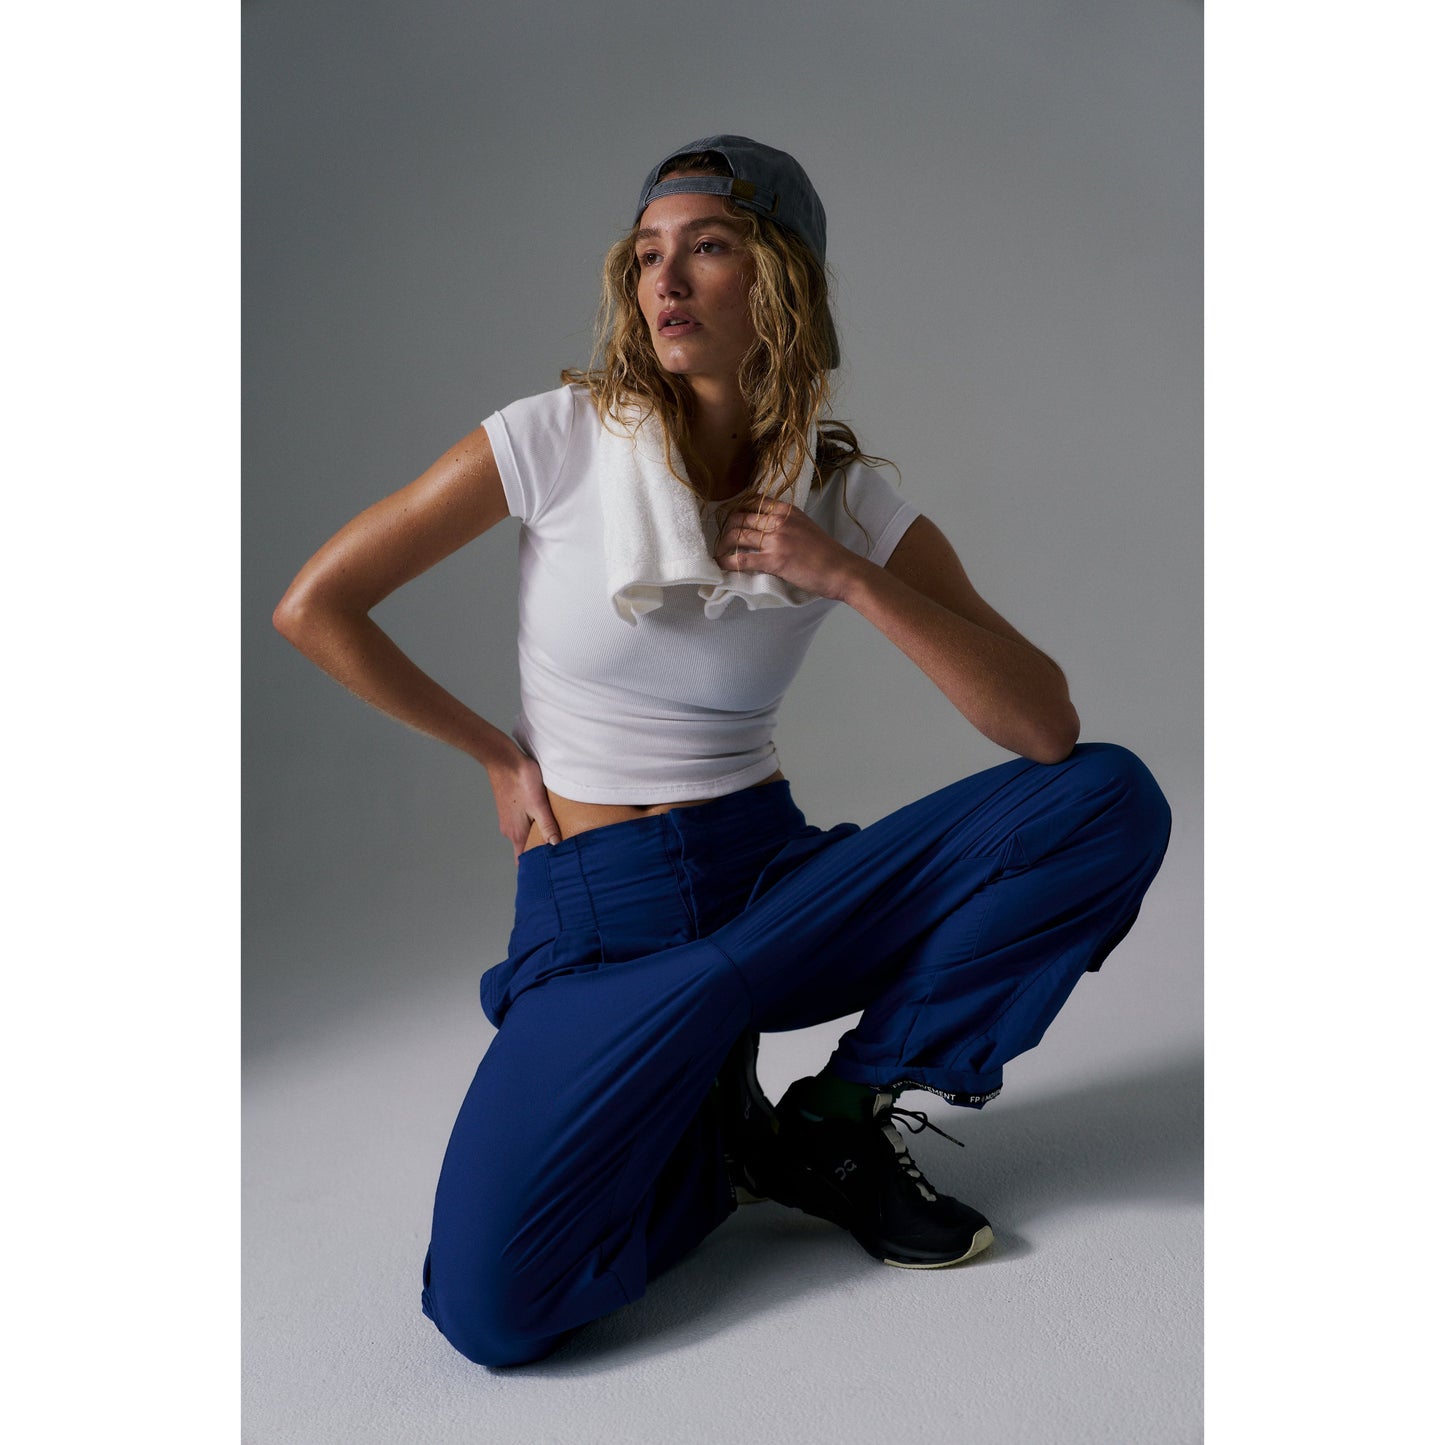 Woman in Free People Movement's Ribbed Baby Tee in White and blue pants, wearing a gray cap, sitting and looking to the side against a gray background.